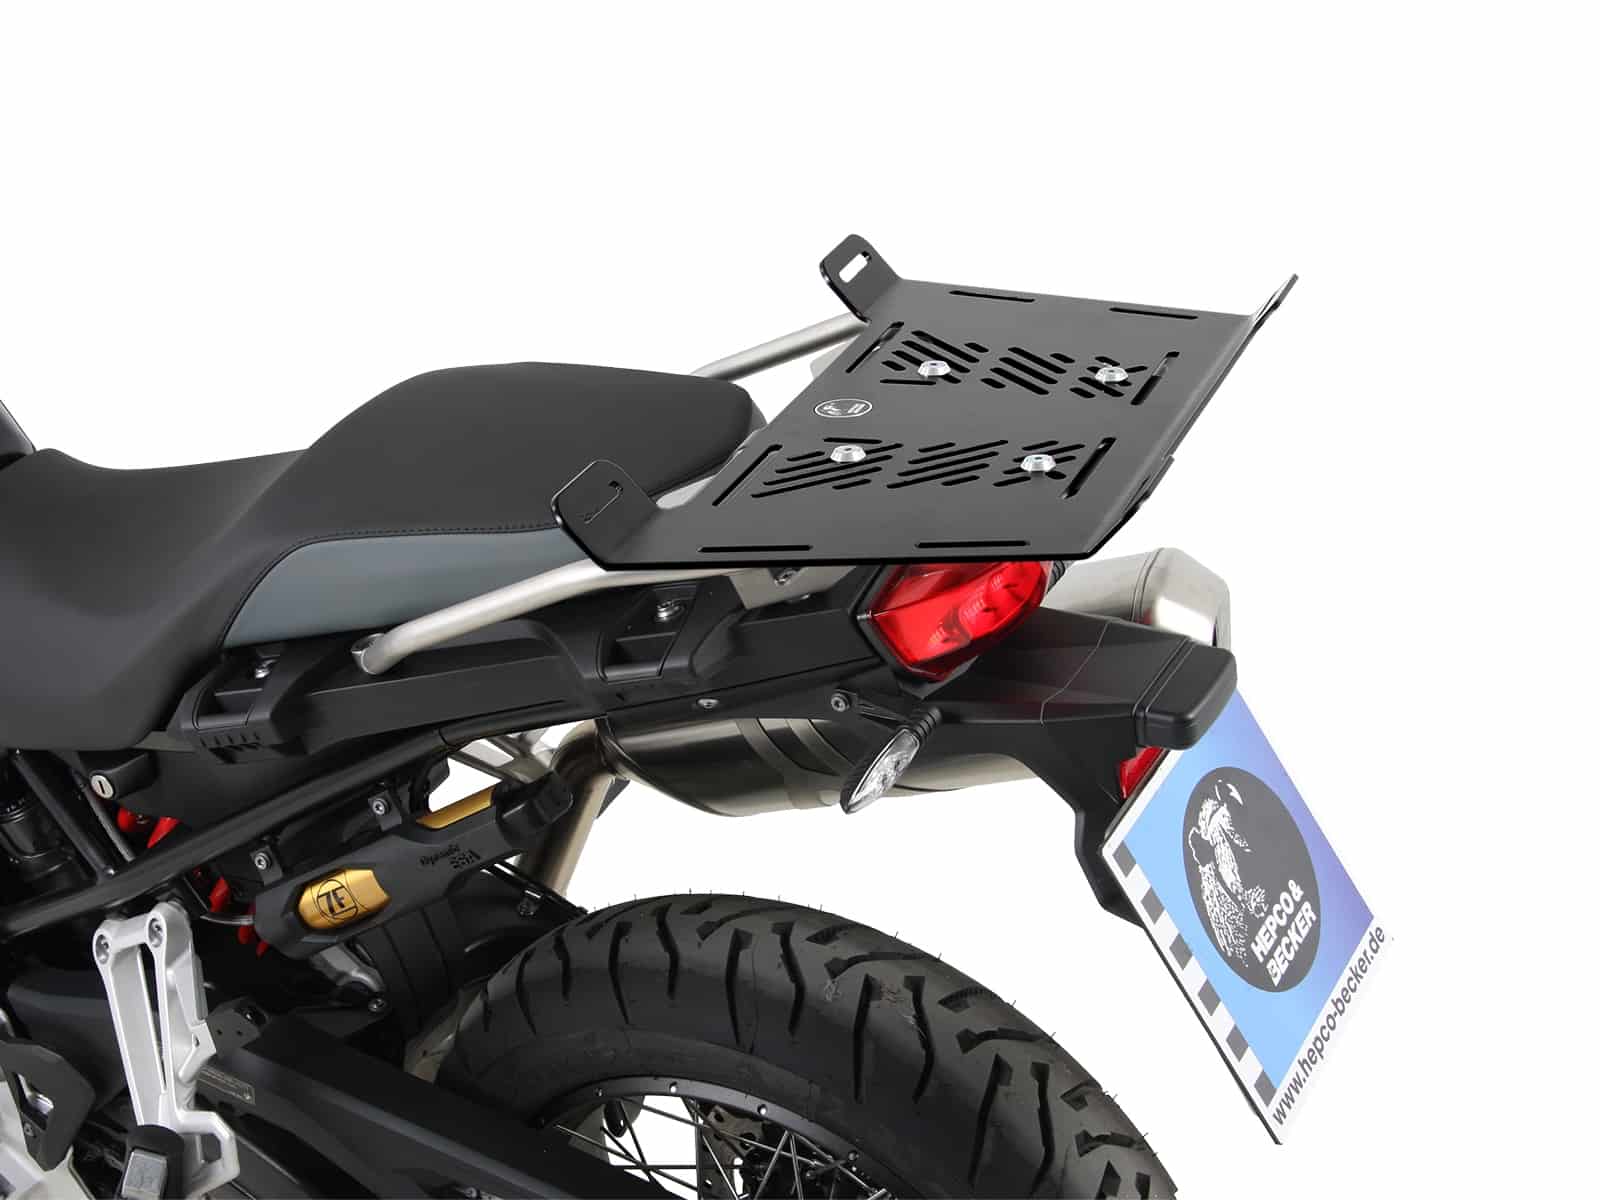 Modelspecific rear enlargement only for original Touring rear rack (special Touring package) for BMW F 750 GS (2018-)